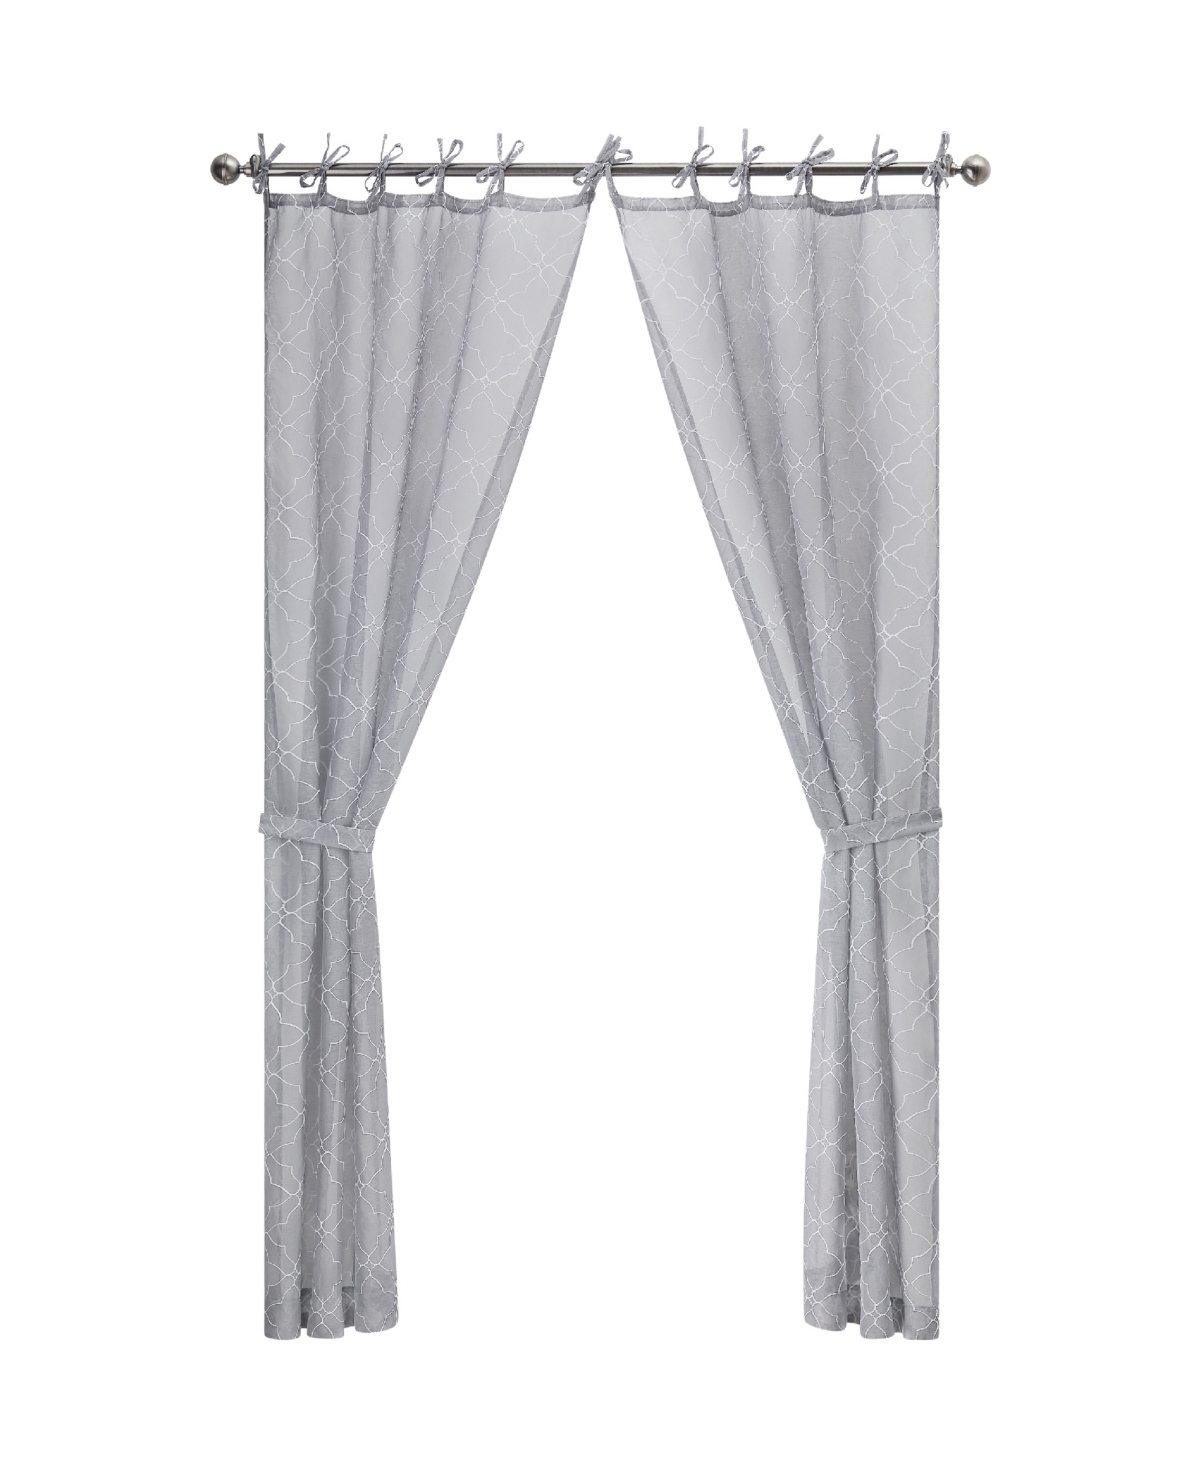 Jessica Simpson Nora Embroidery Sheer Tie Top Window Curtain Panel Pair With Tiebacks, 38" X 96" In Gray